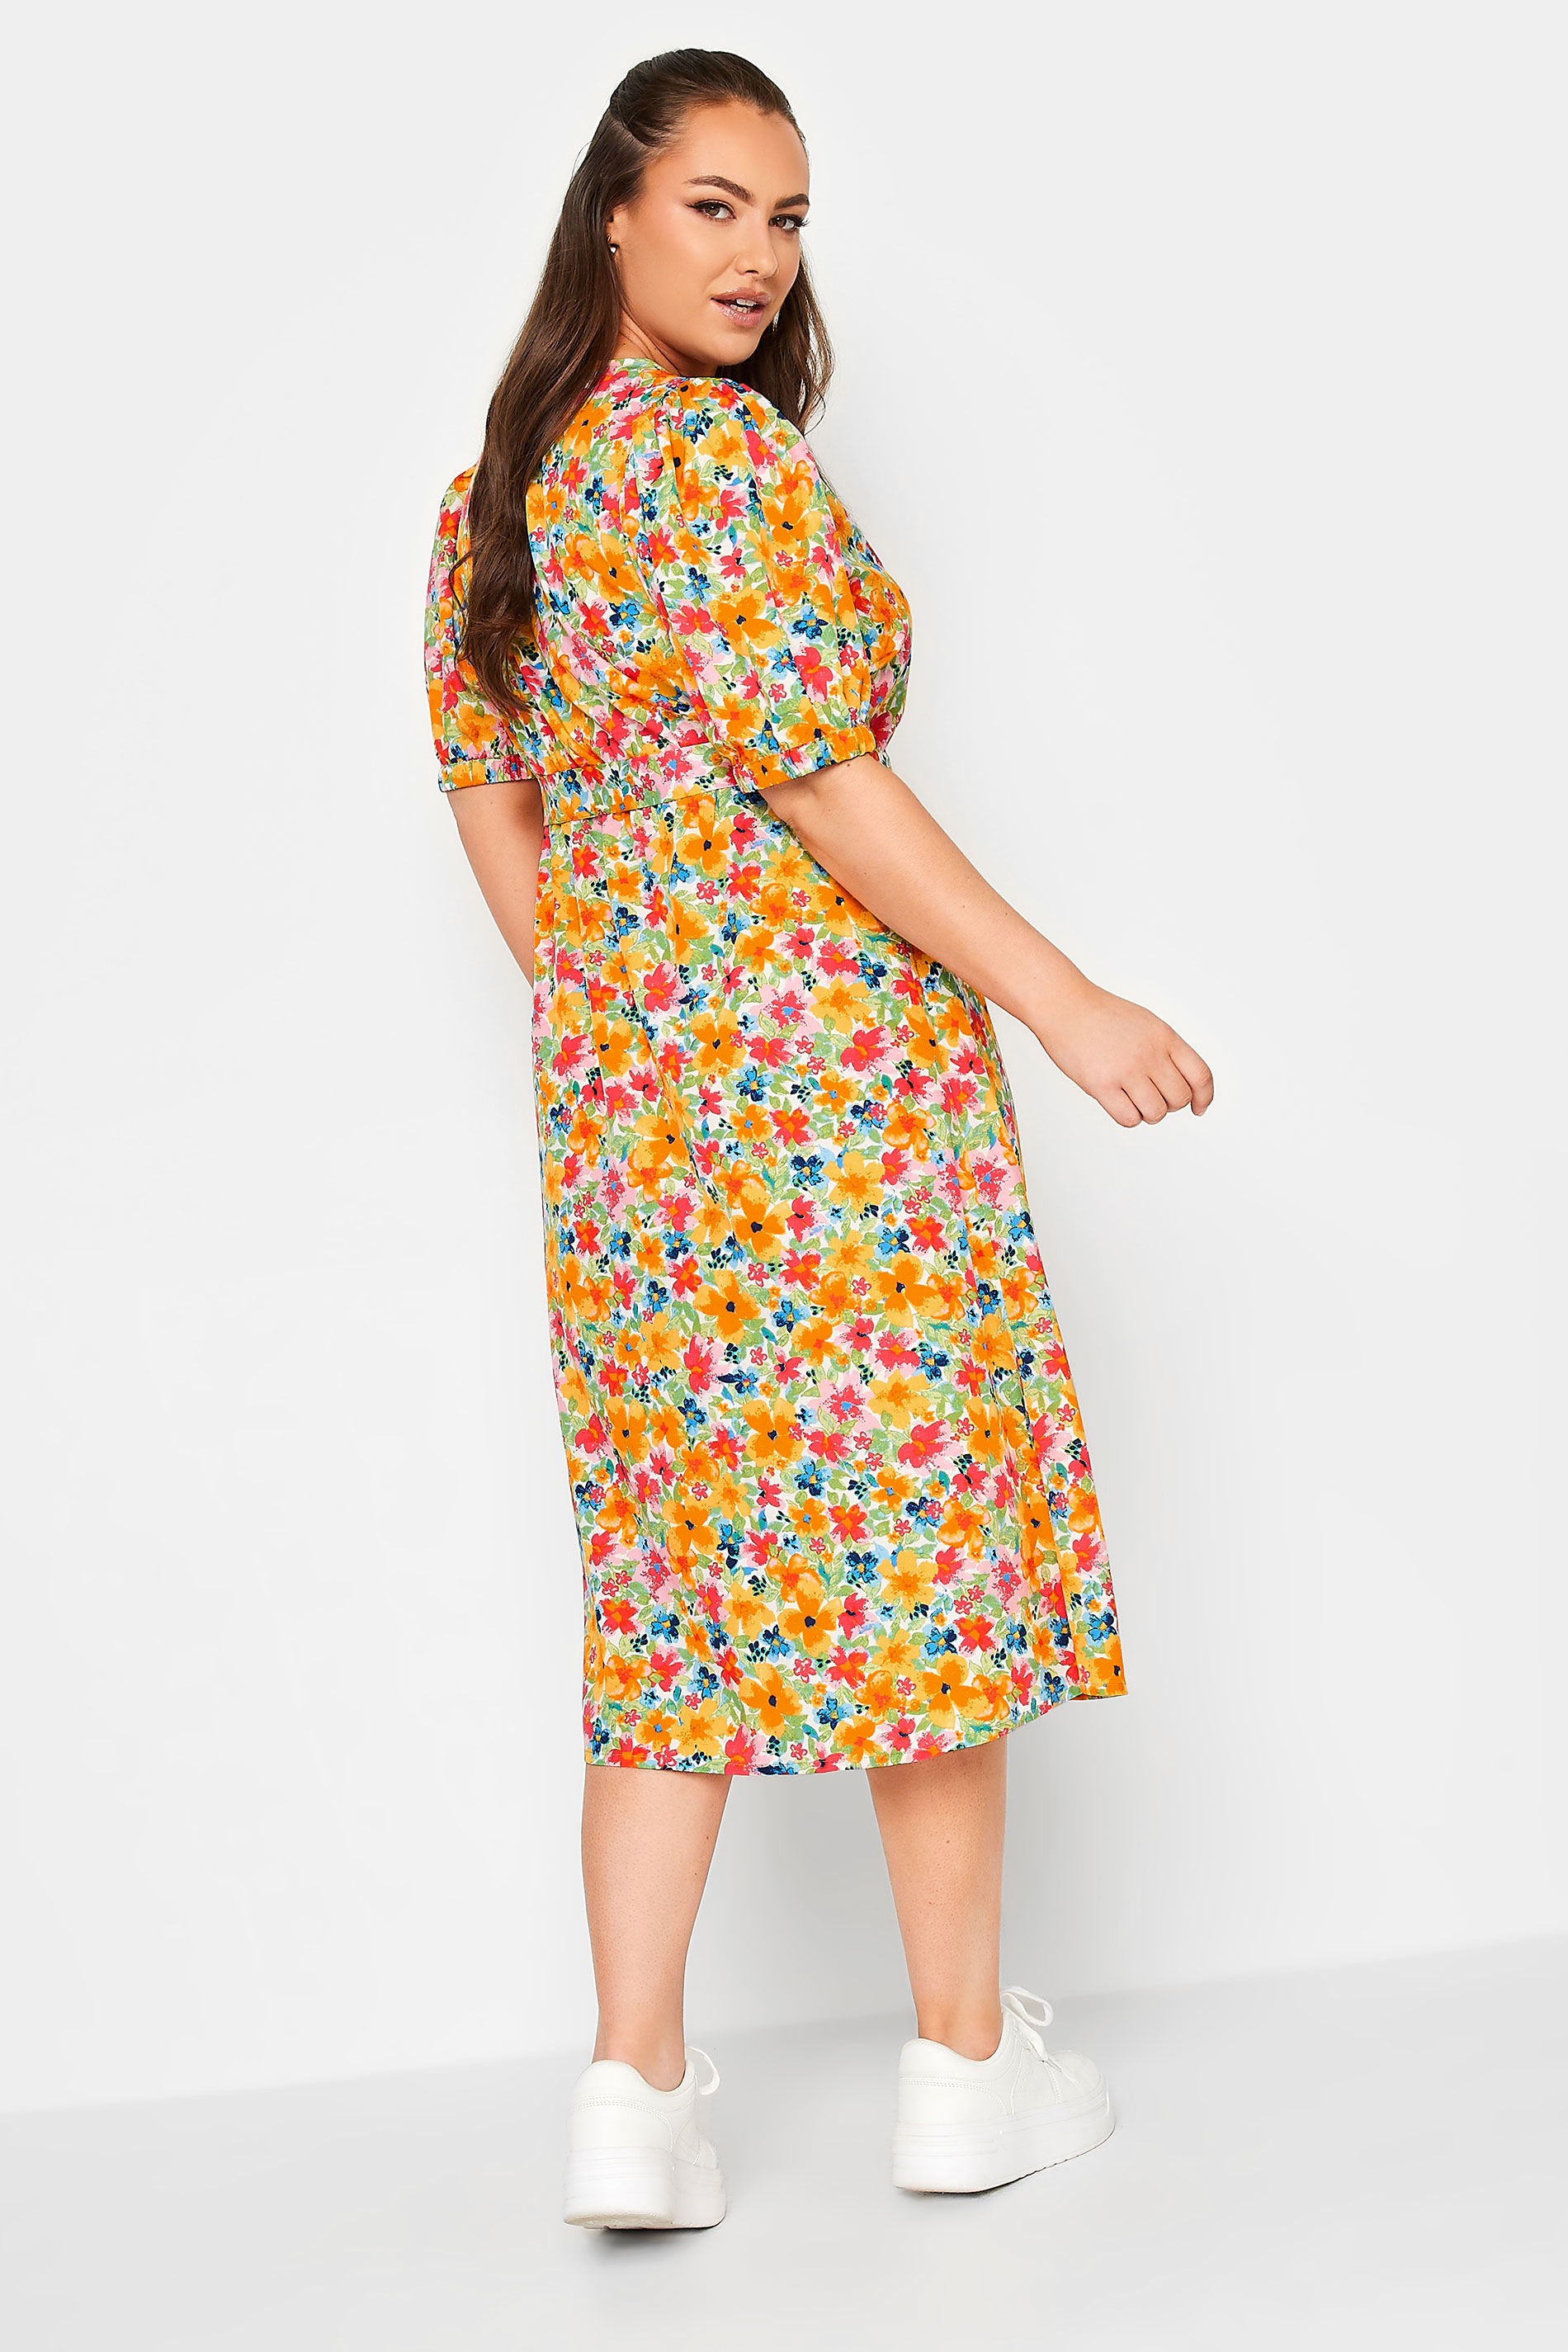 LIMITED COLLECTION Curve Orange Sweetheart Neckline Floral Print Tea Dress | Yours Clothing 3